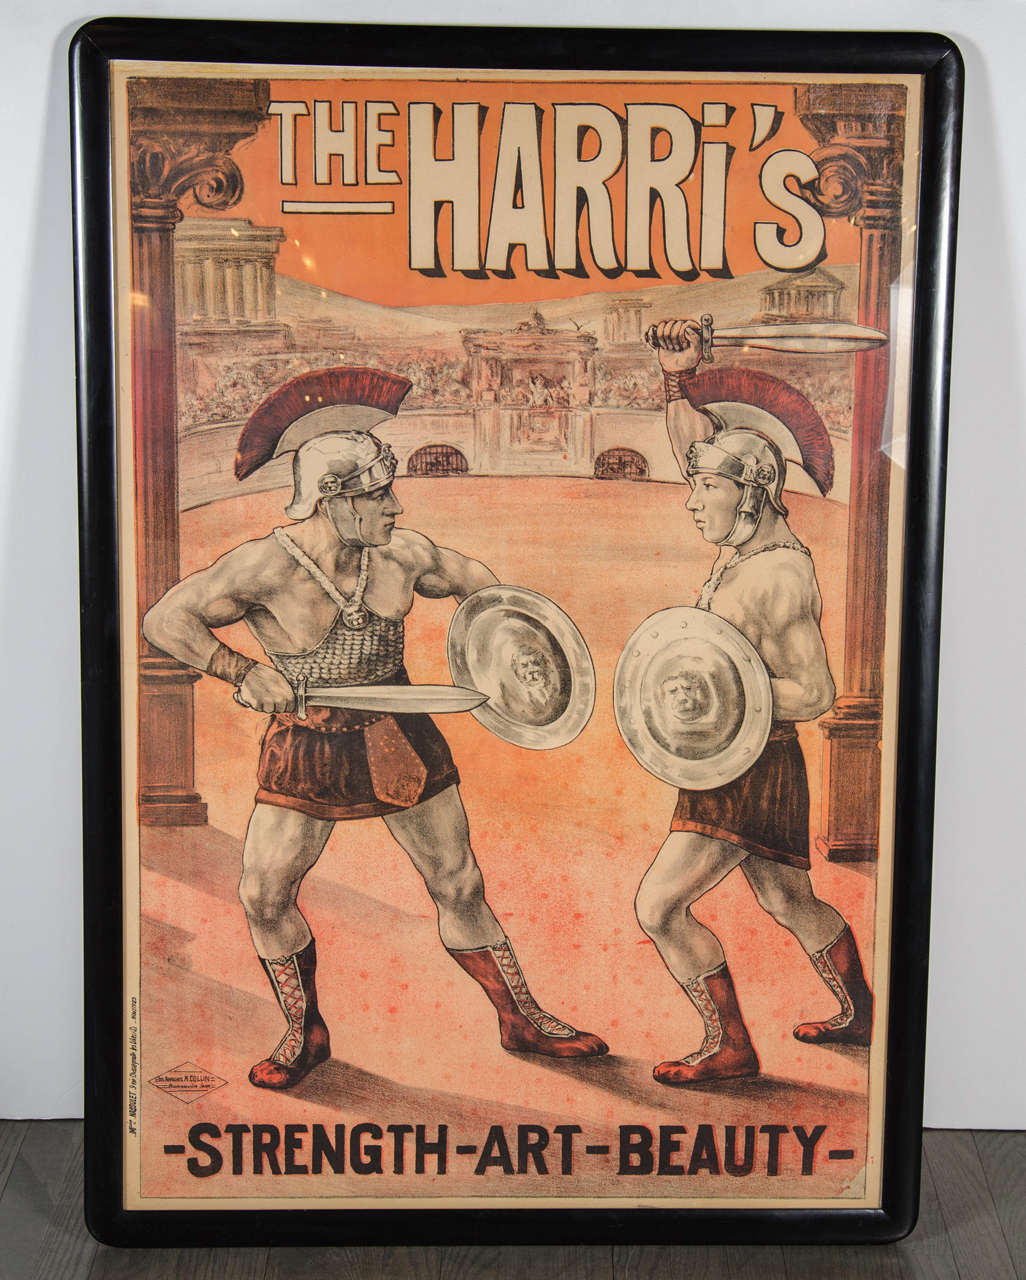 This original French Art Deco poster features two Neo-classical Roman gladiators in combat.It is done in rich tones of burnt umber and brown and grey.The piece is museum framed in black lacquer and dated 1925 as well.